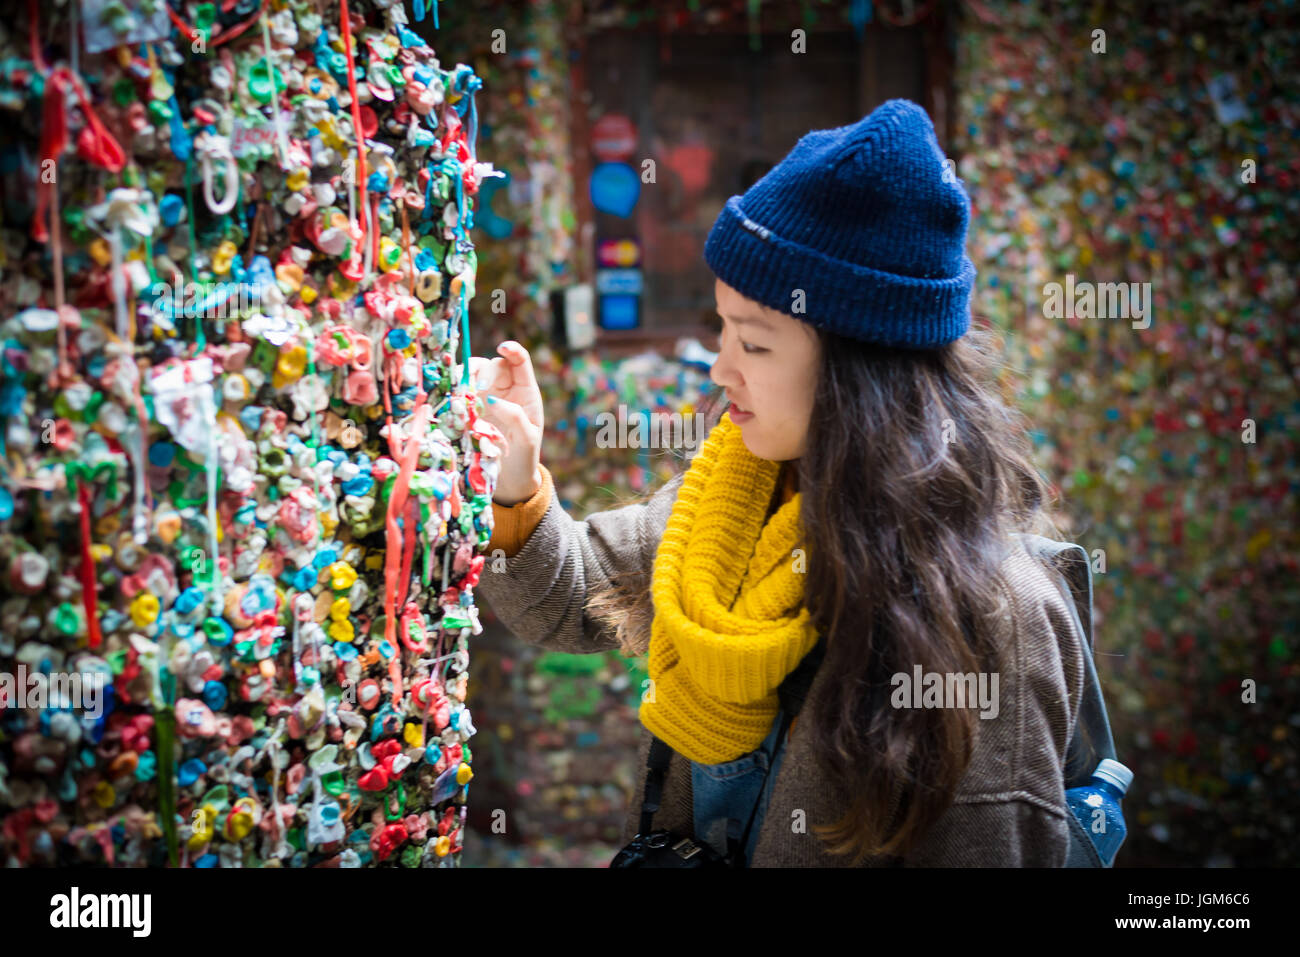 Girl sticking a piece of chewed up bubblegum on Seattle's gum wall. Stock Photo